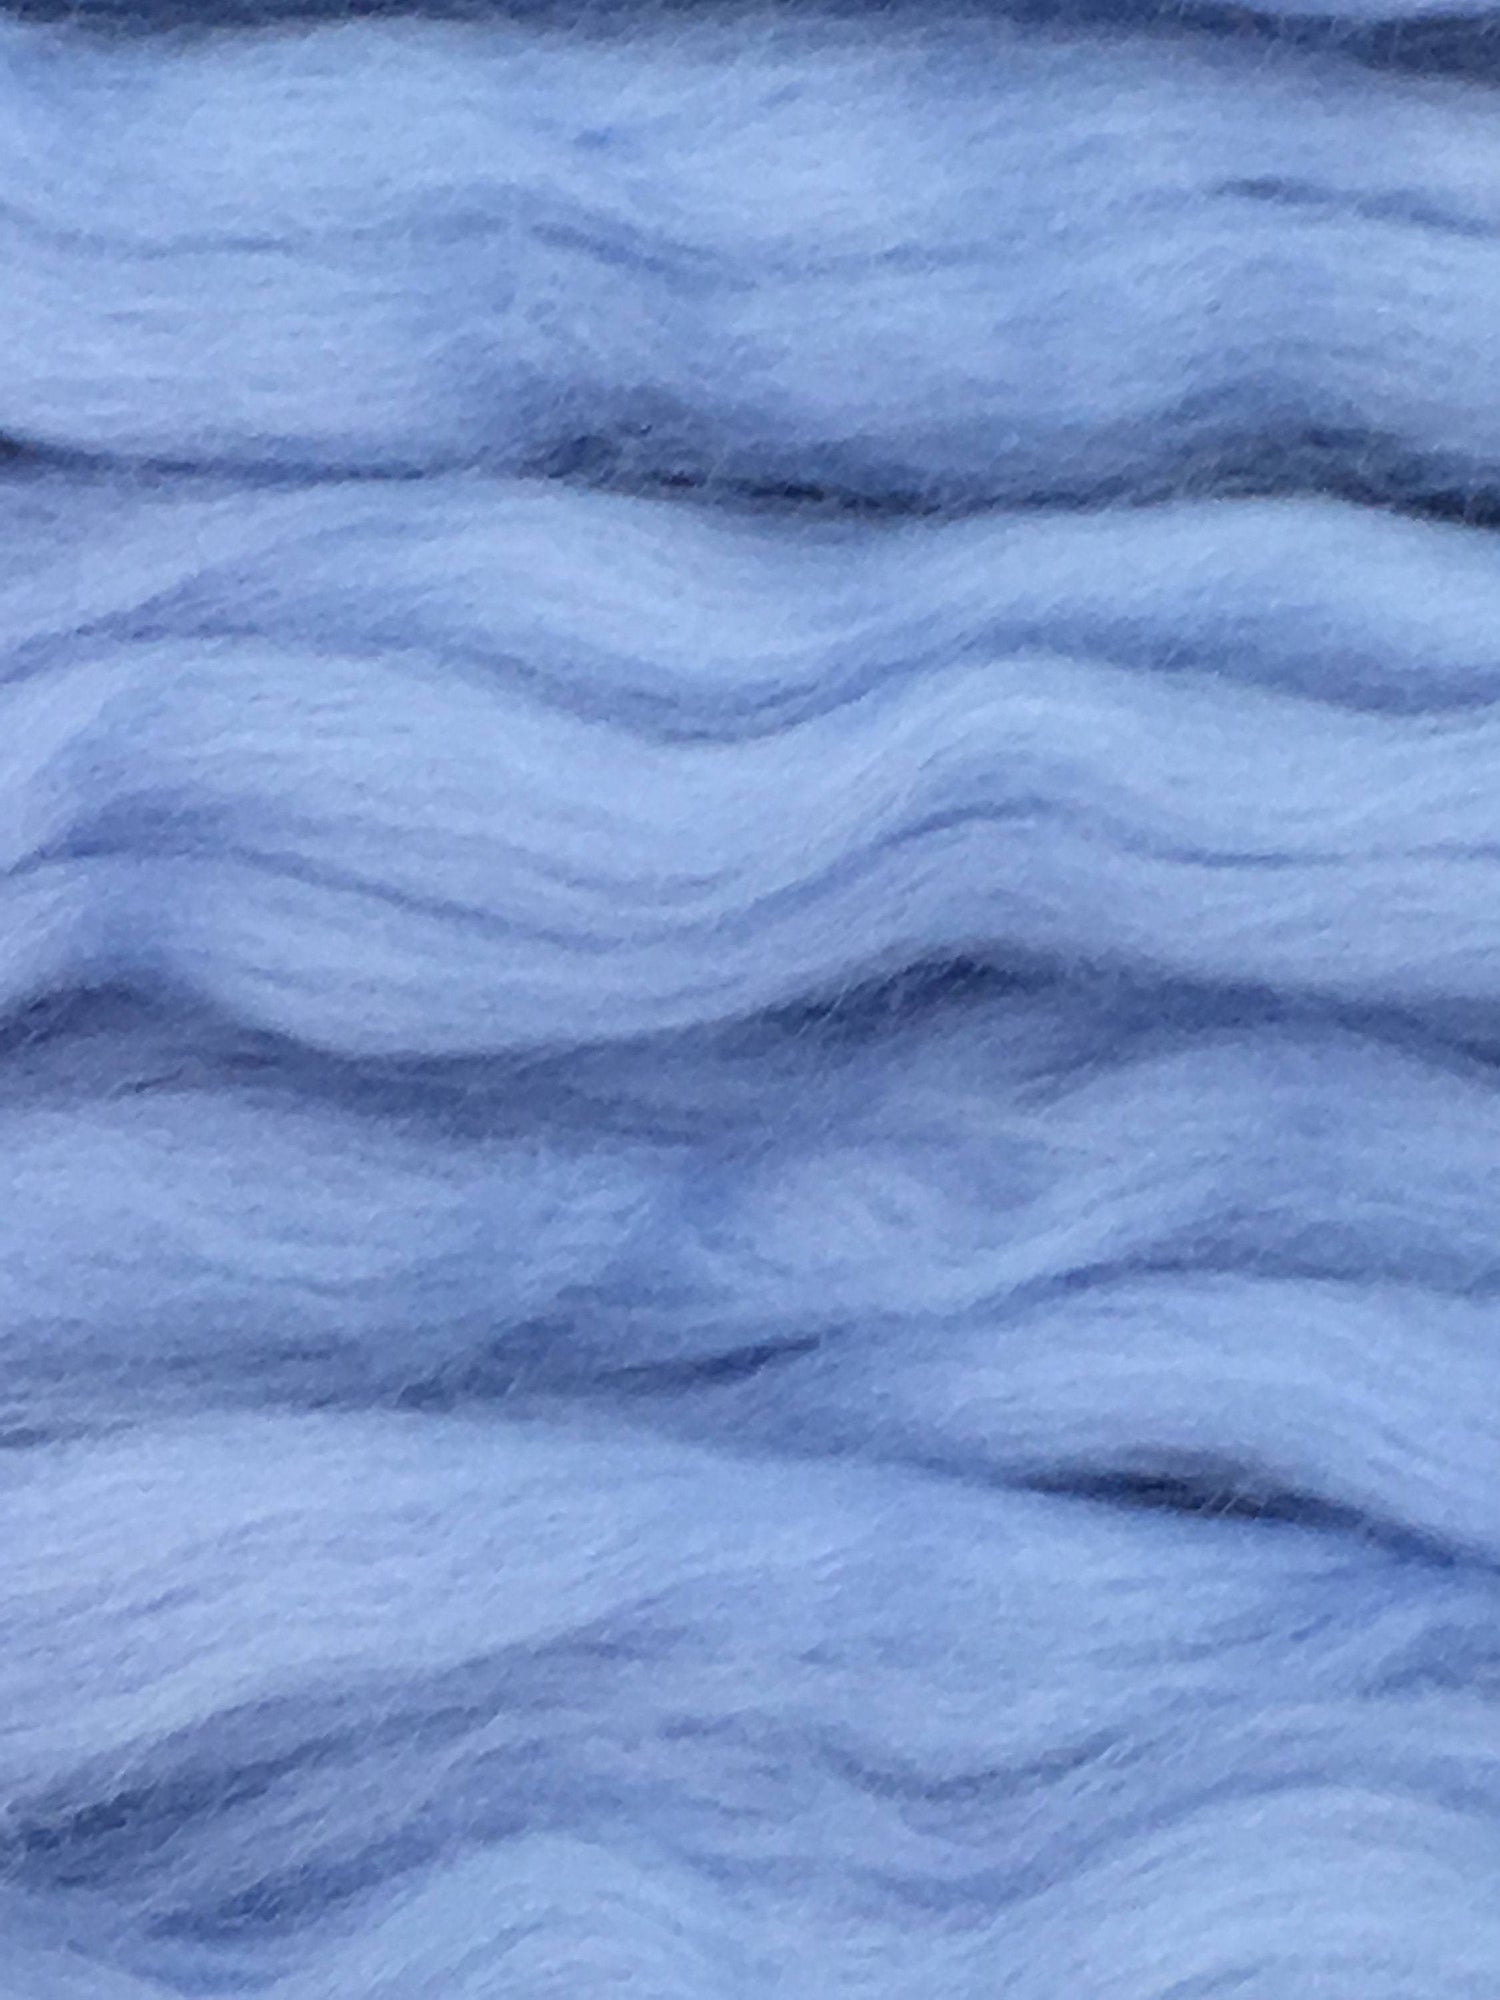 9 oz Blue Wool Roving for Spinning into Yarn and Wet or Needle Felting.